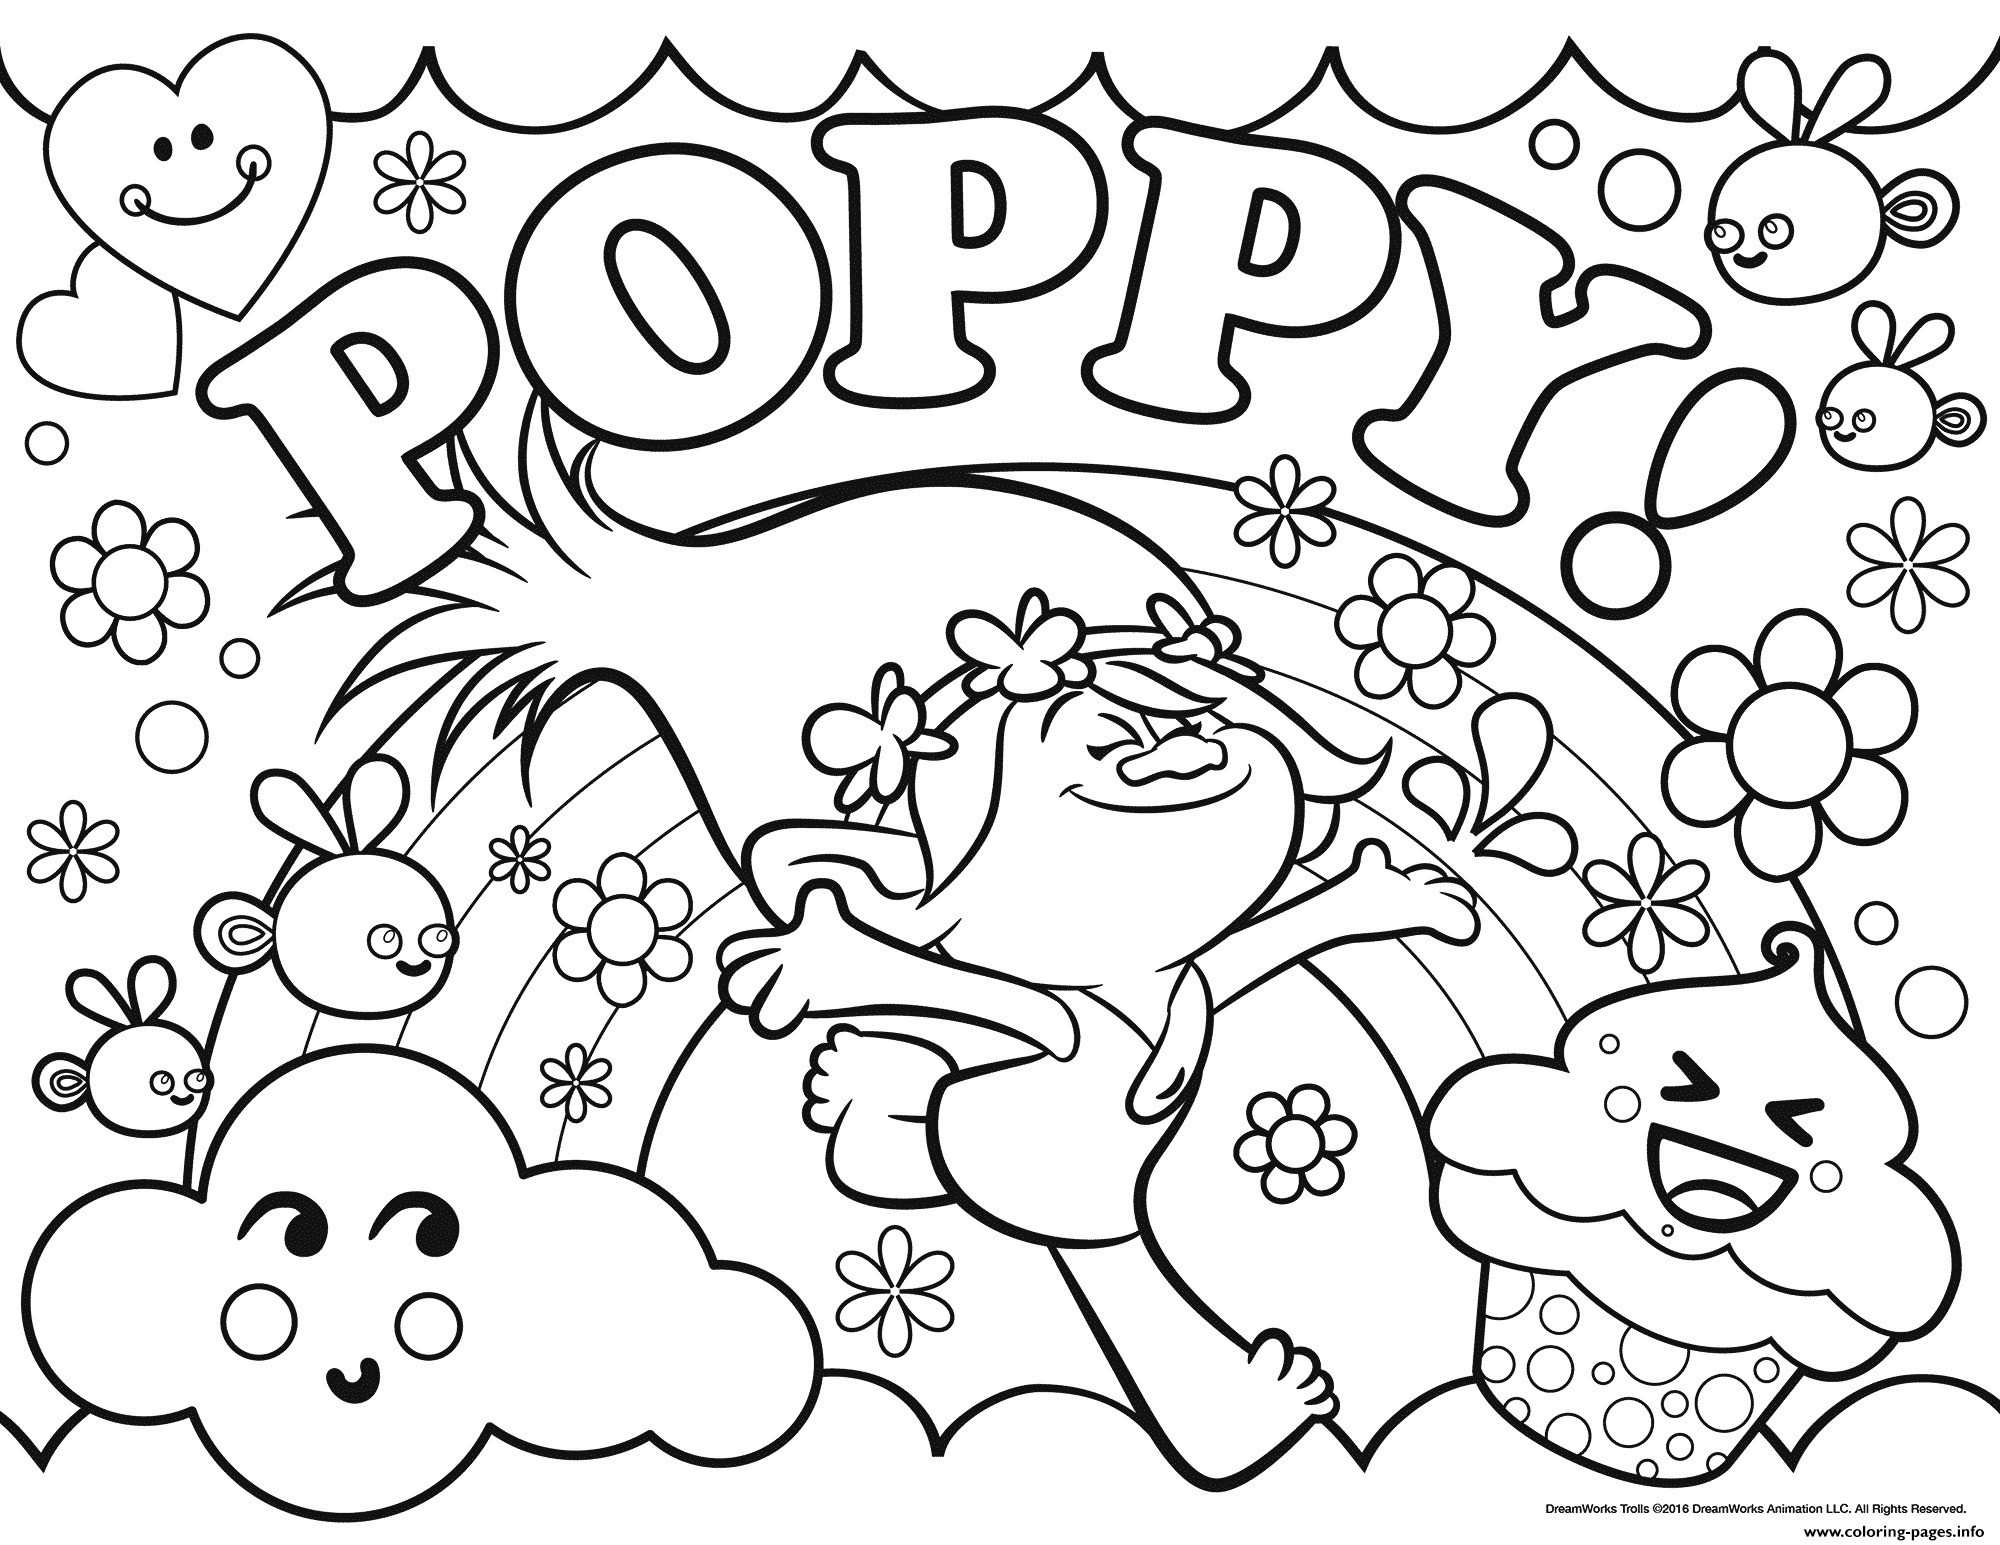 All Trolls Coloring Pages